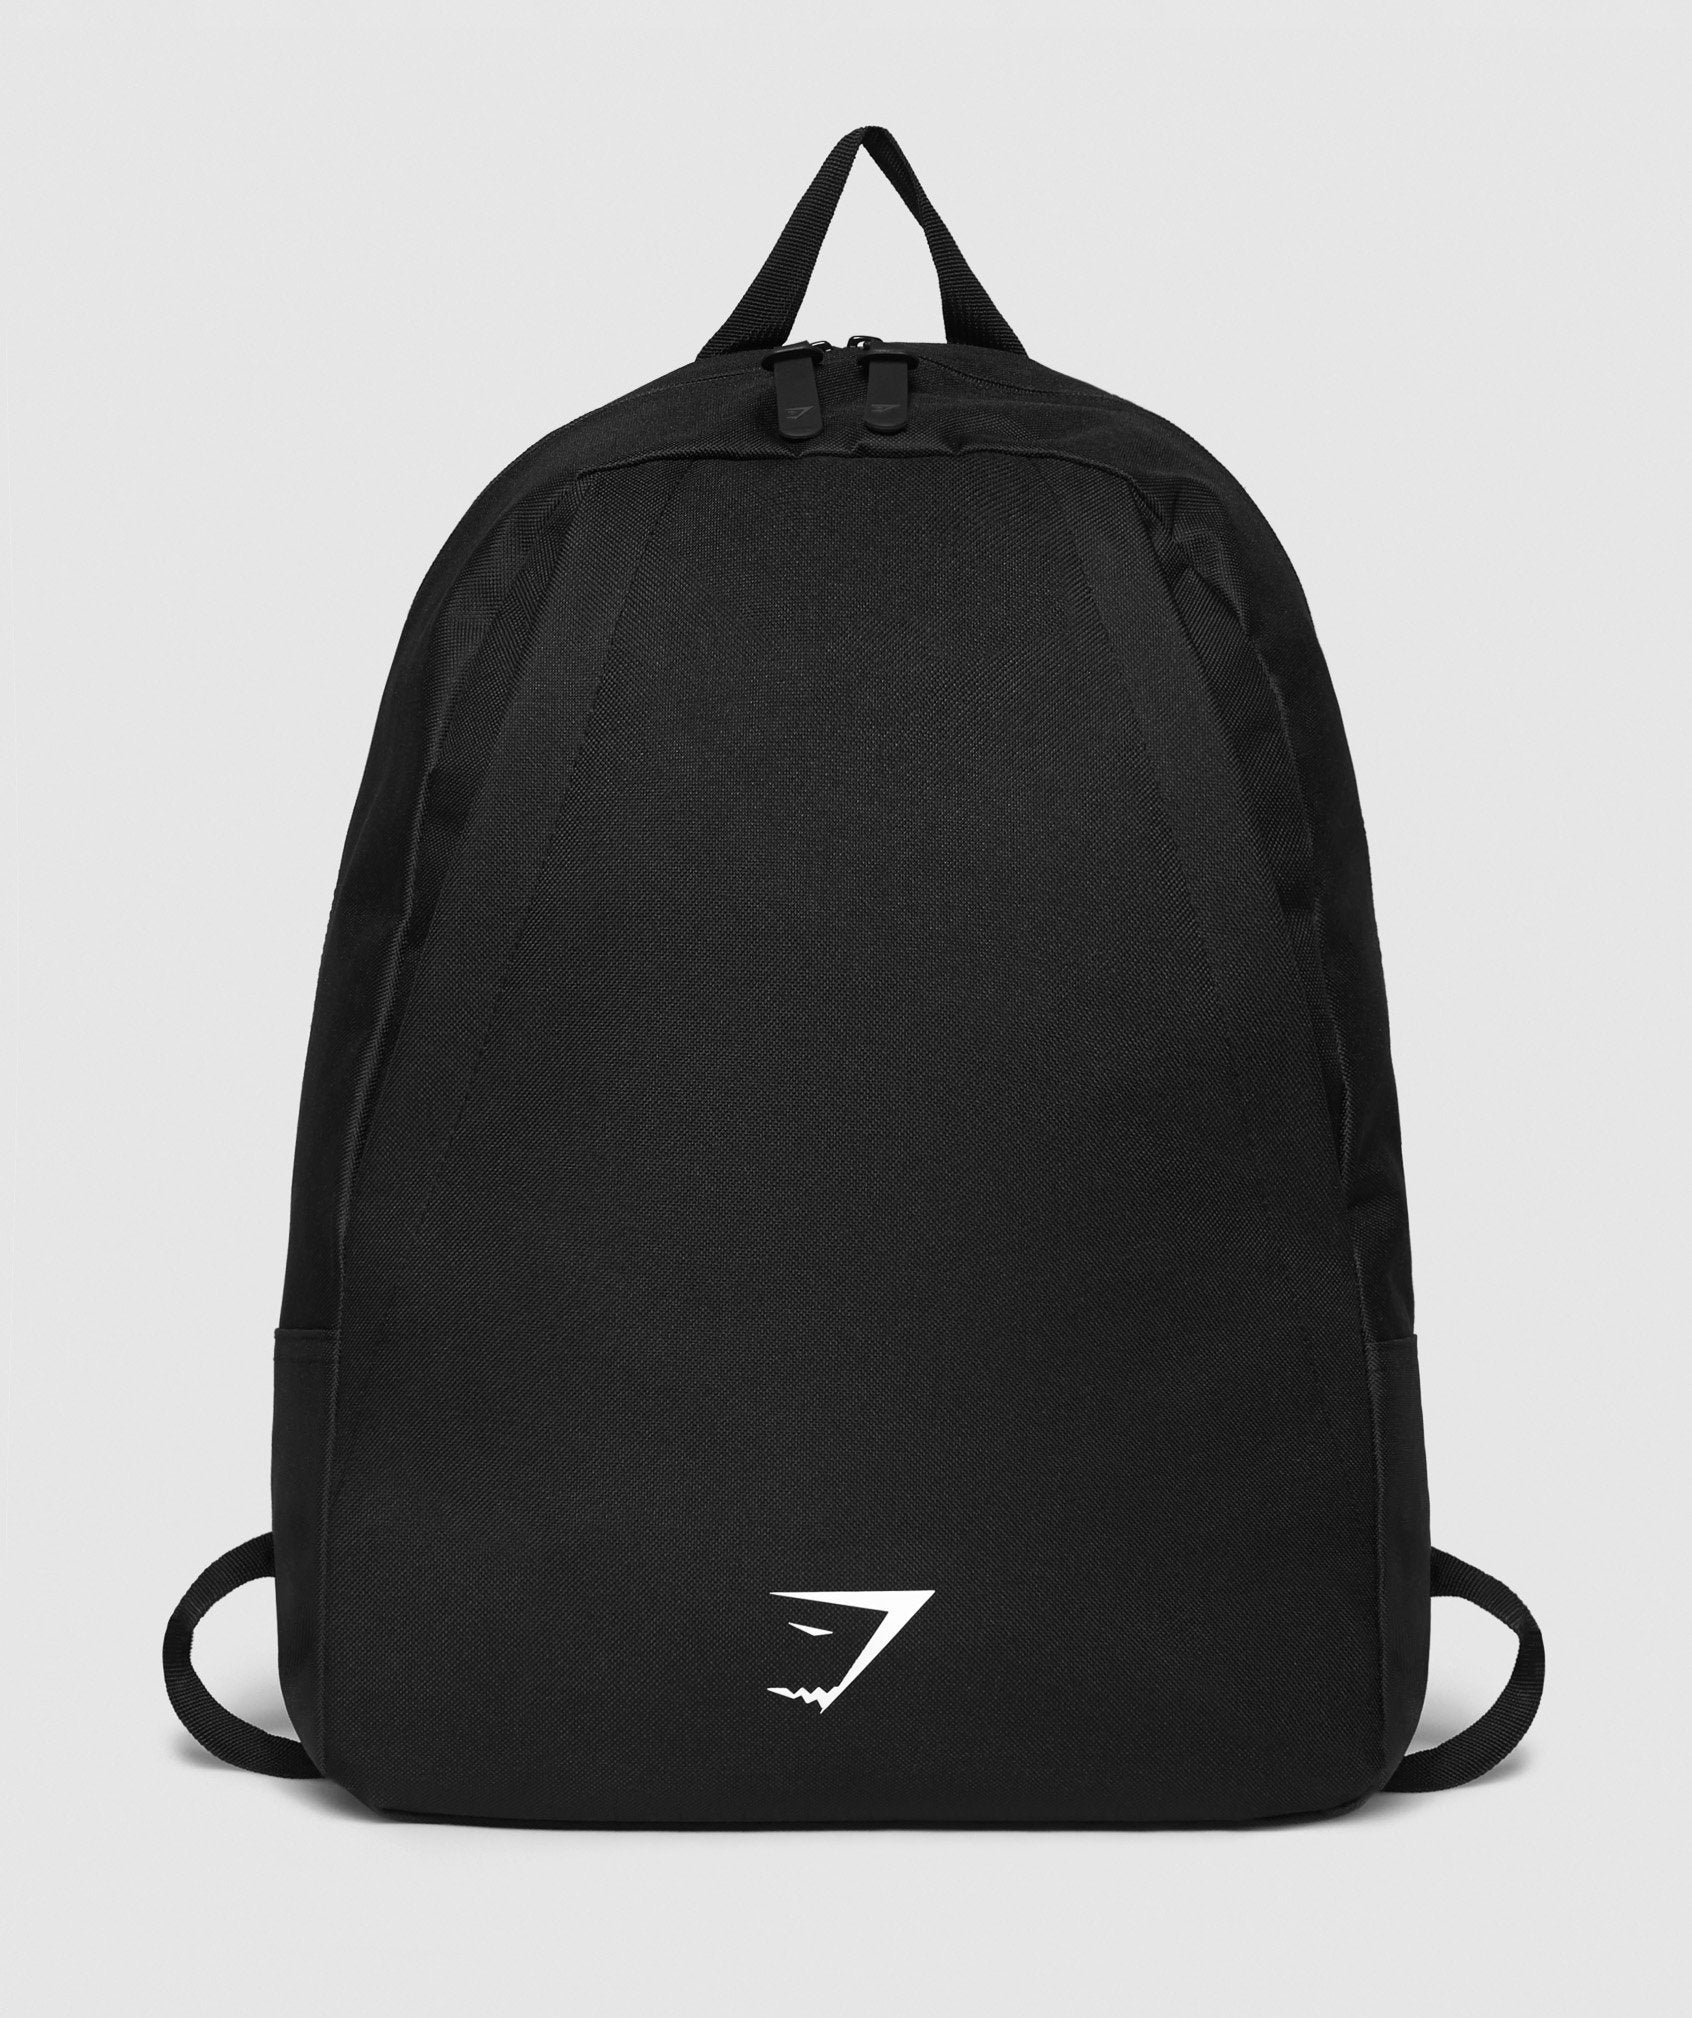 Academy Backpack in Black - view 2